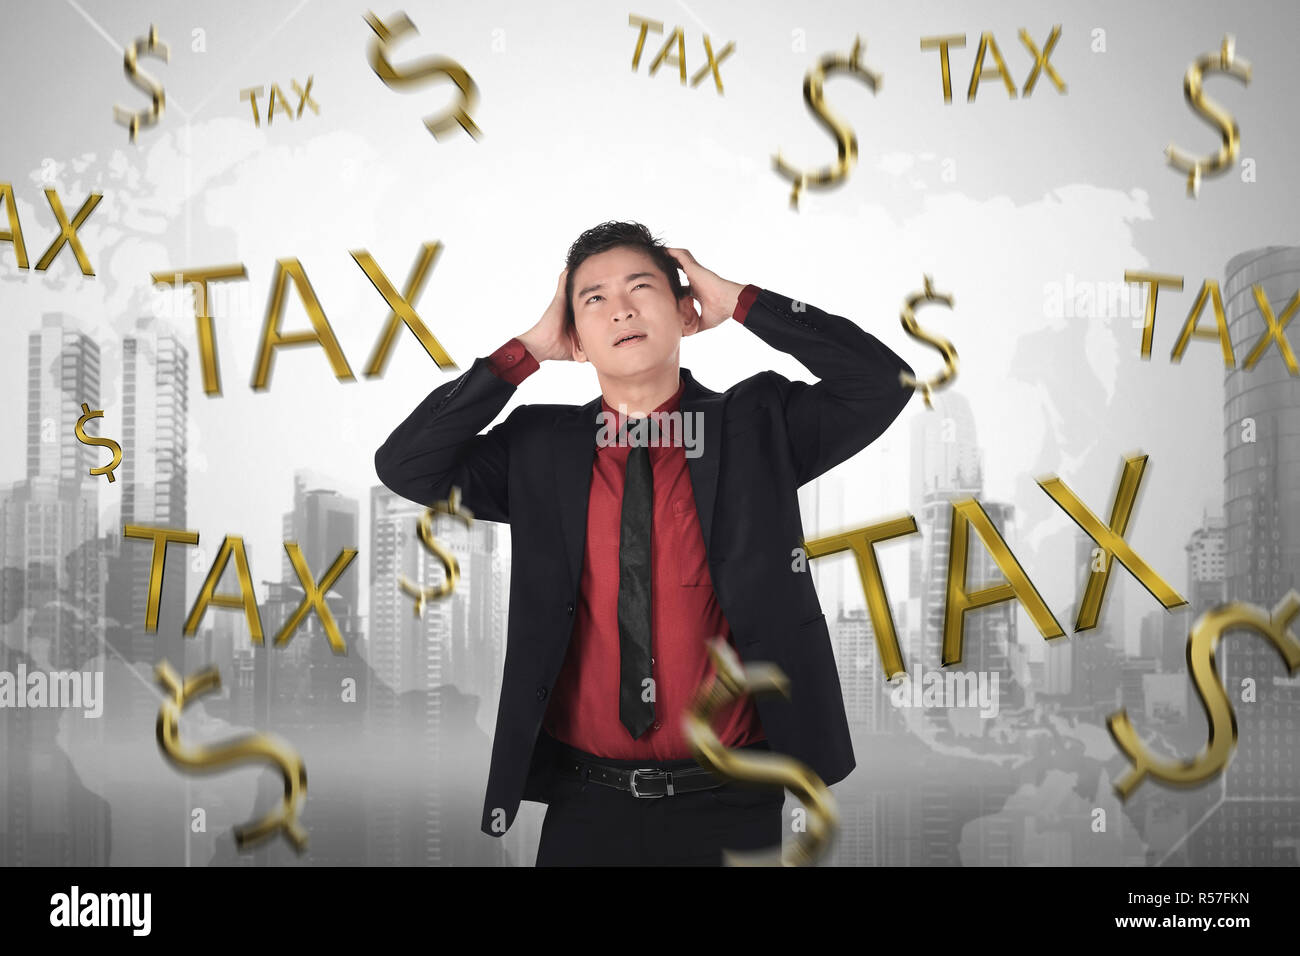 Frustration asian businessman with tax time sign Stock Photo